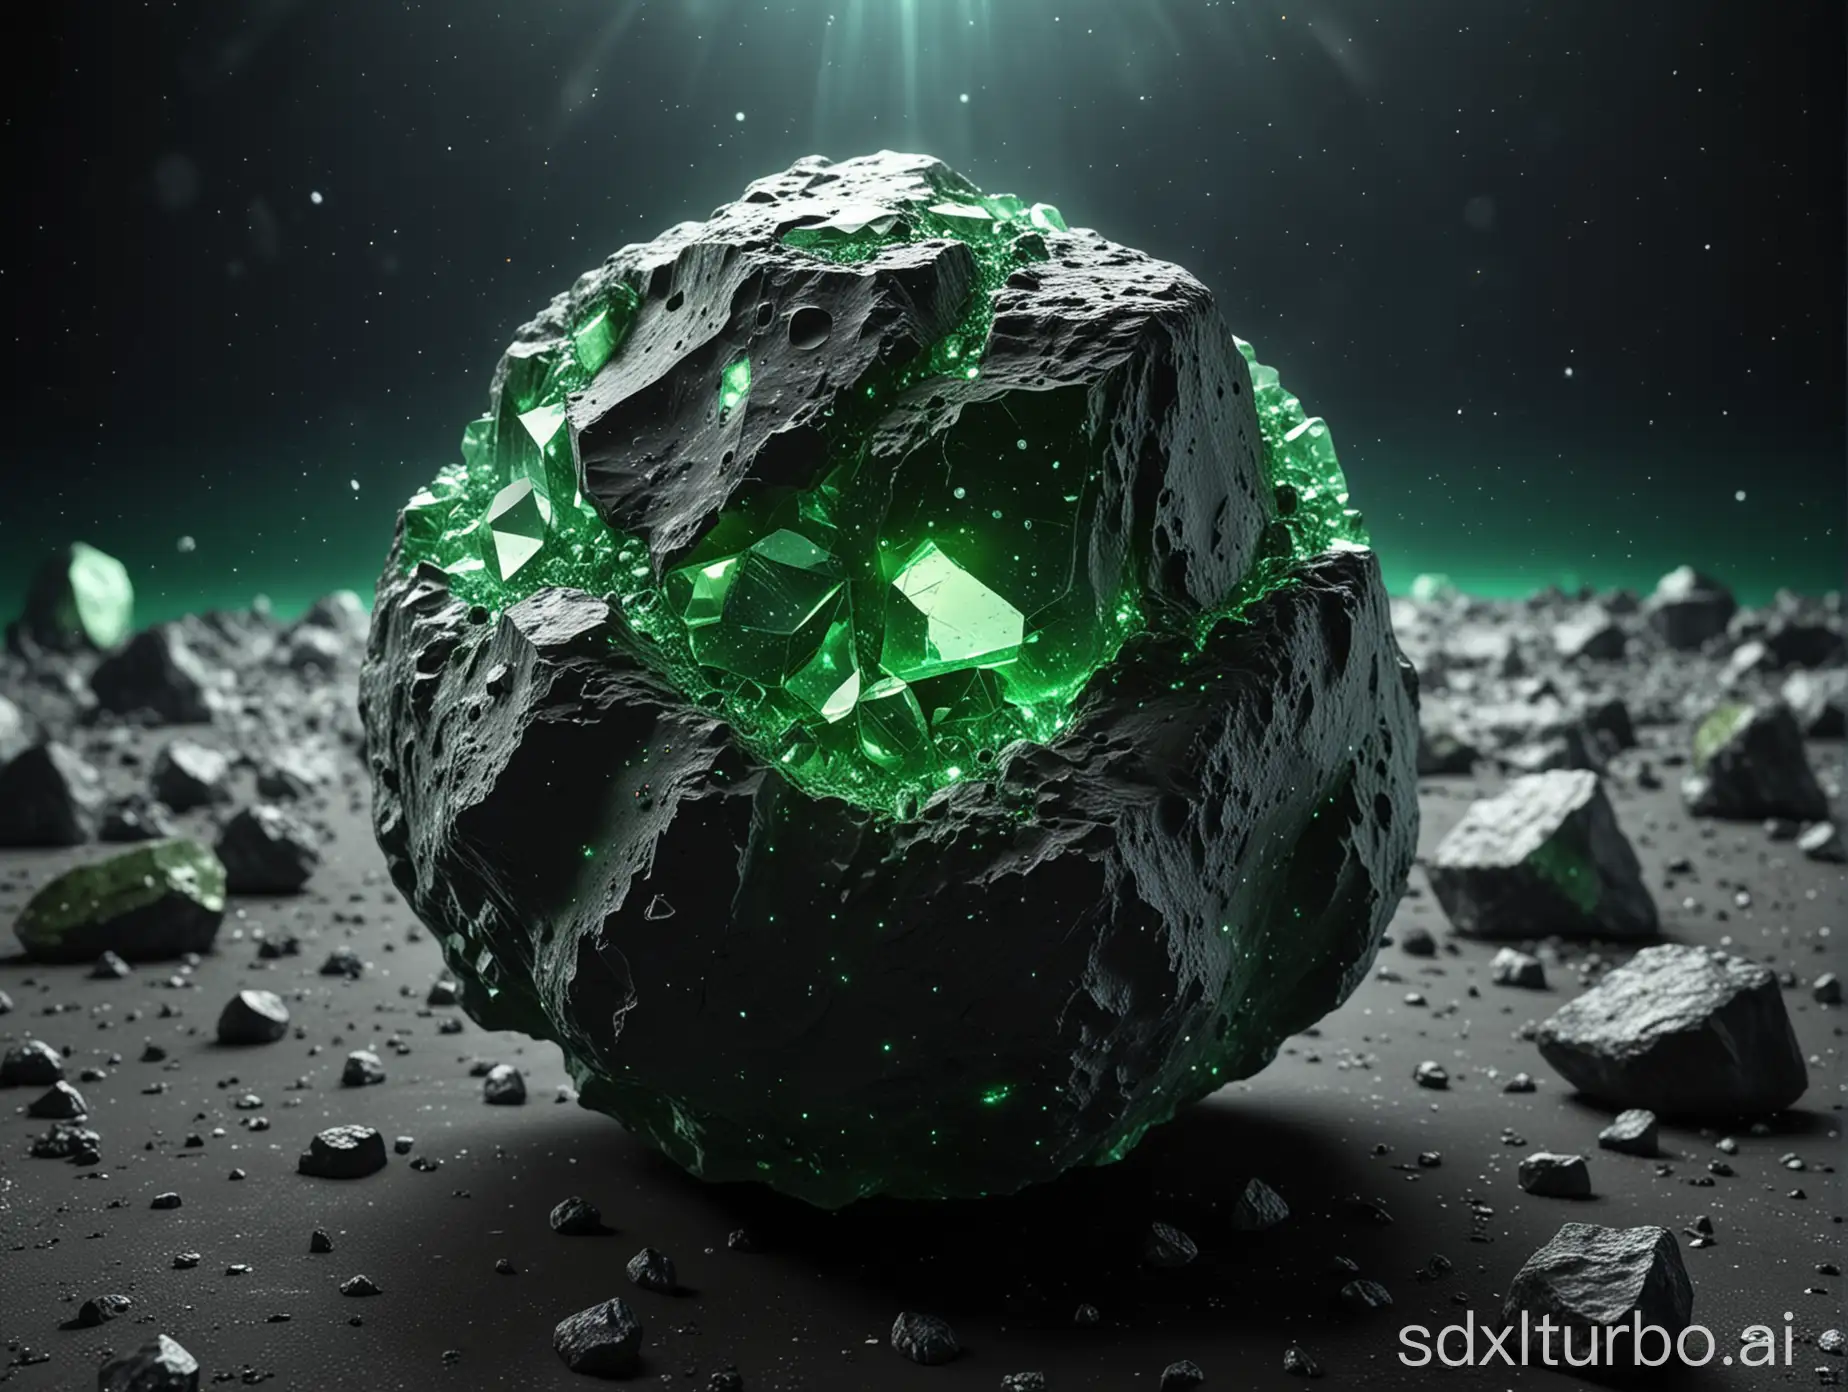 Realistic-Asteroid-with-Green-Cubic-Crystals-Detailed-3D-Render-of-a-Unique-Celestial-Body